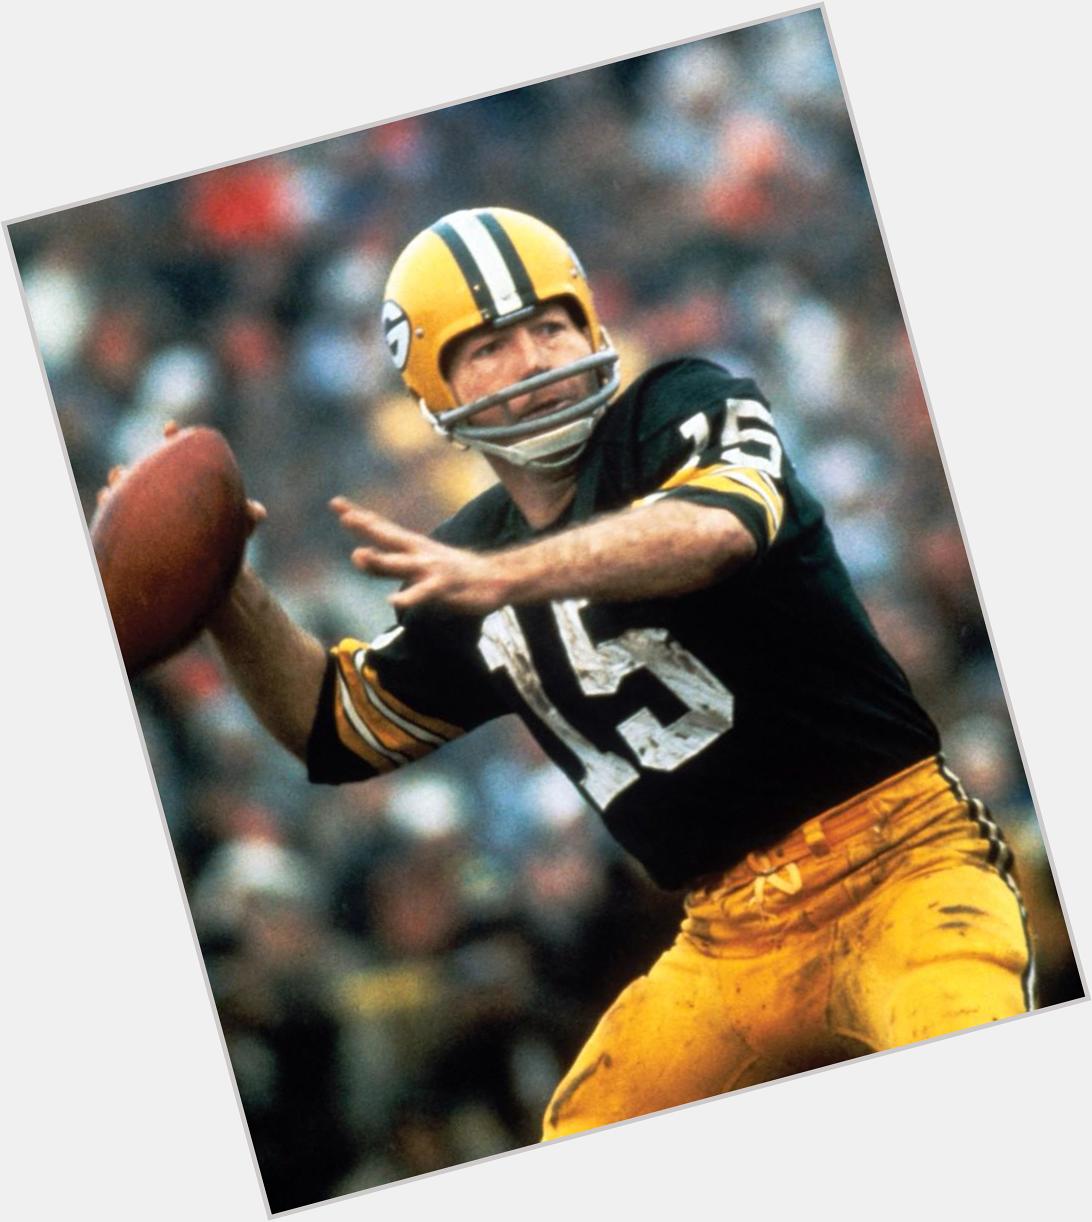 Happy 81st birthday to Alabama and Packers legend, Bart Starr.  